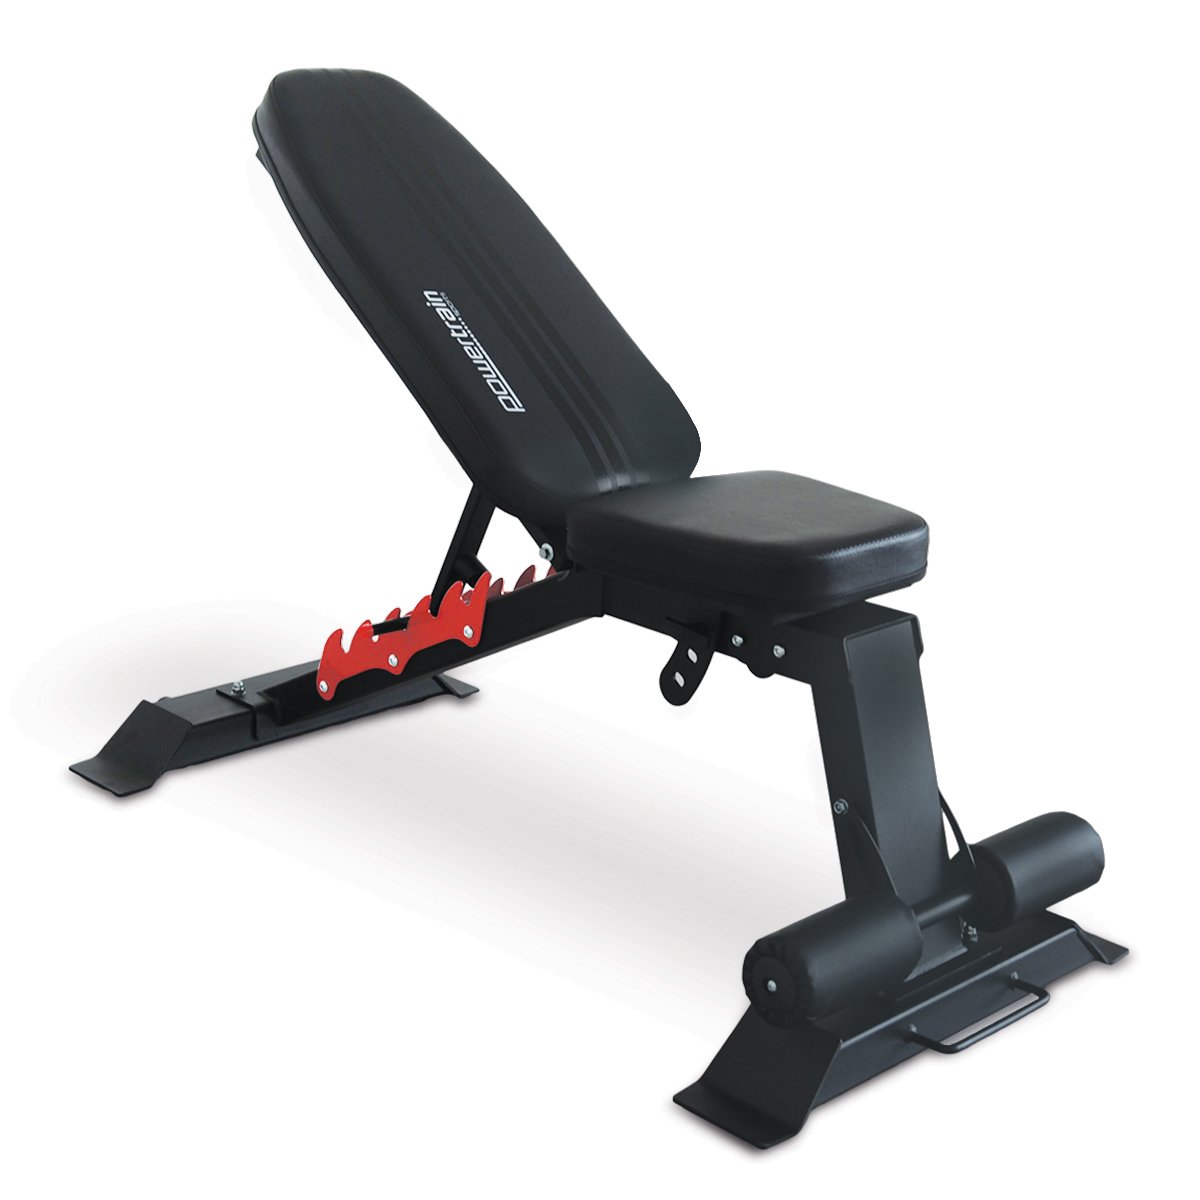 Powertrain Home Gym Adjustable Dumbbell Bench 1